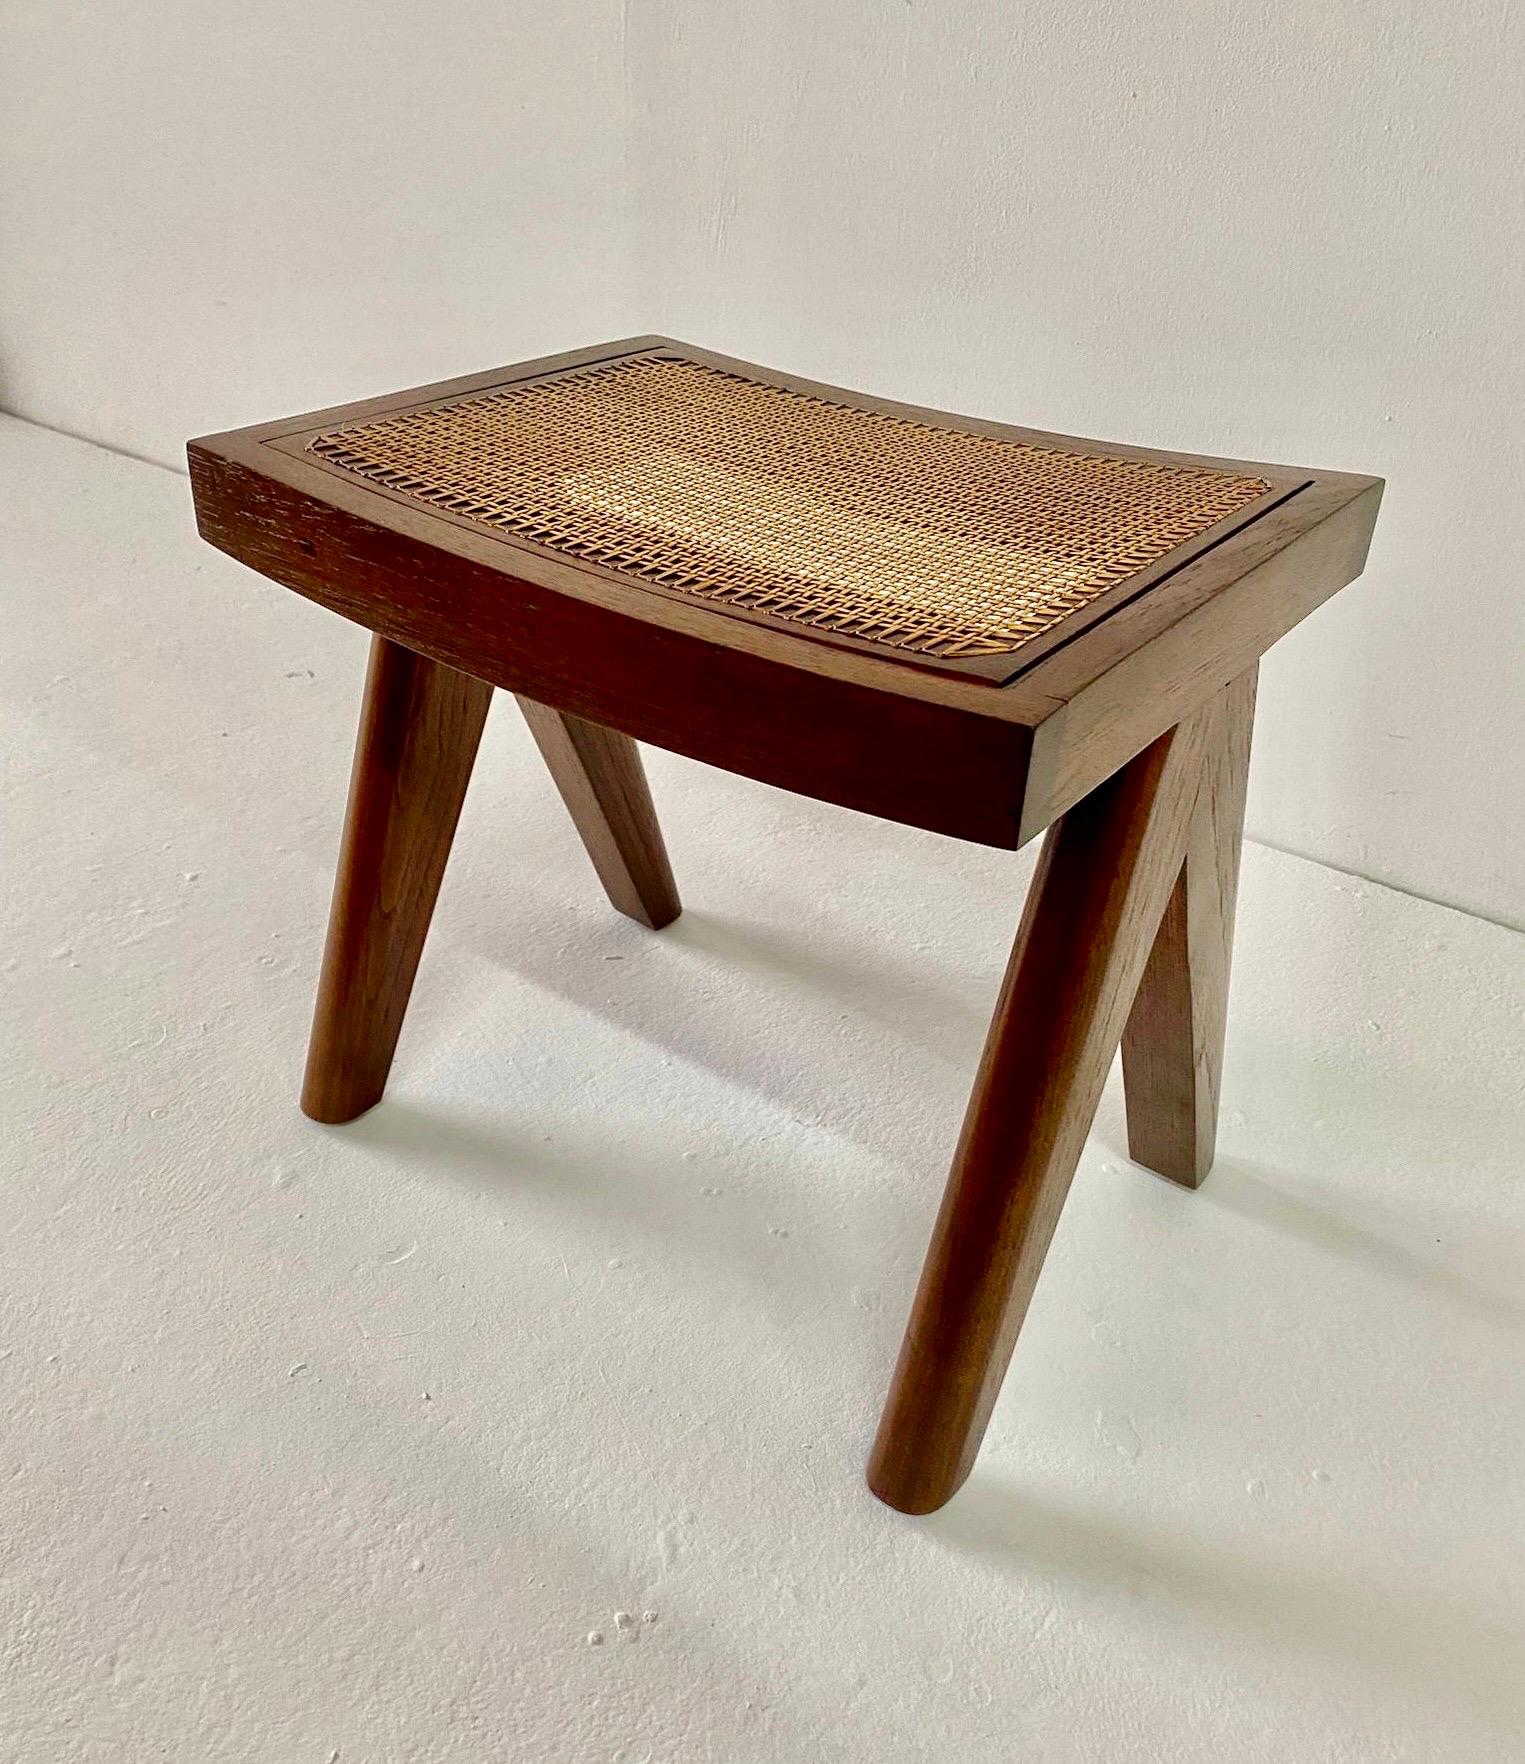 Studio Made Heavy Teak Stools - Manner of Jeanneret (2 Pairs Available) For Sale 5